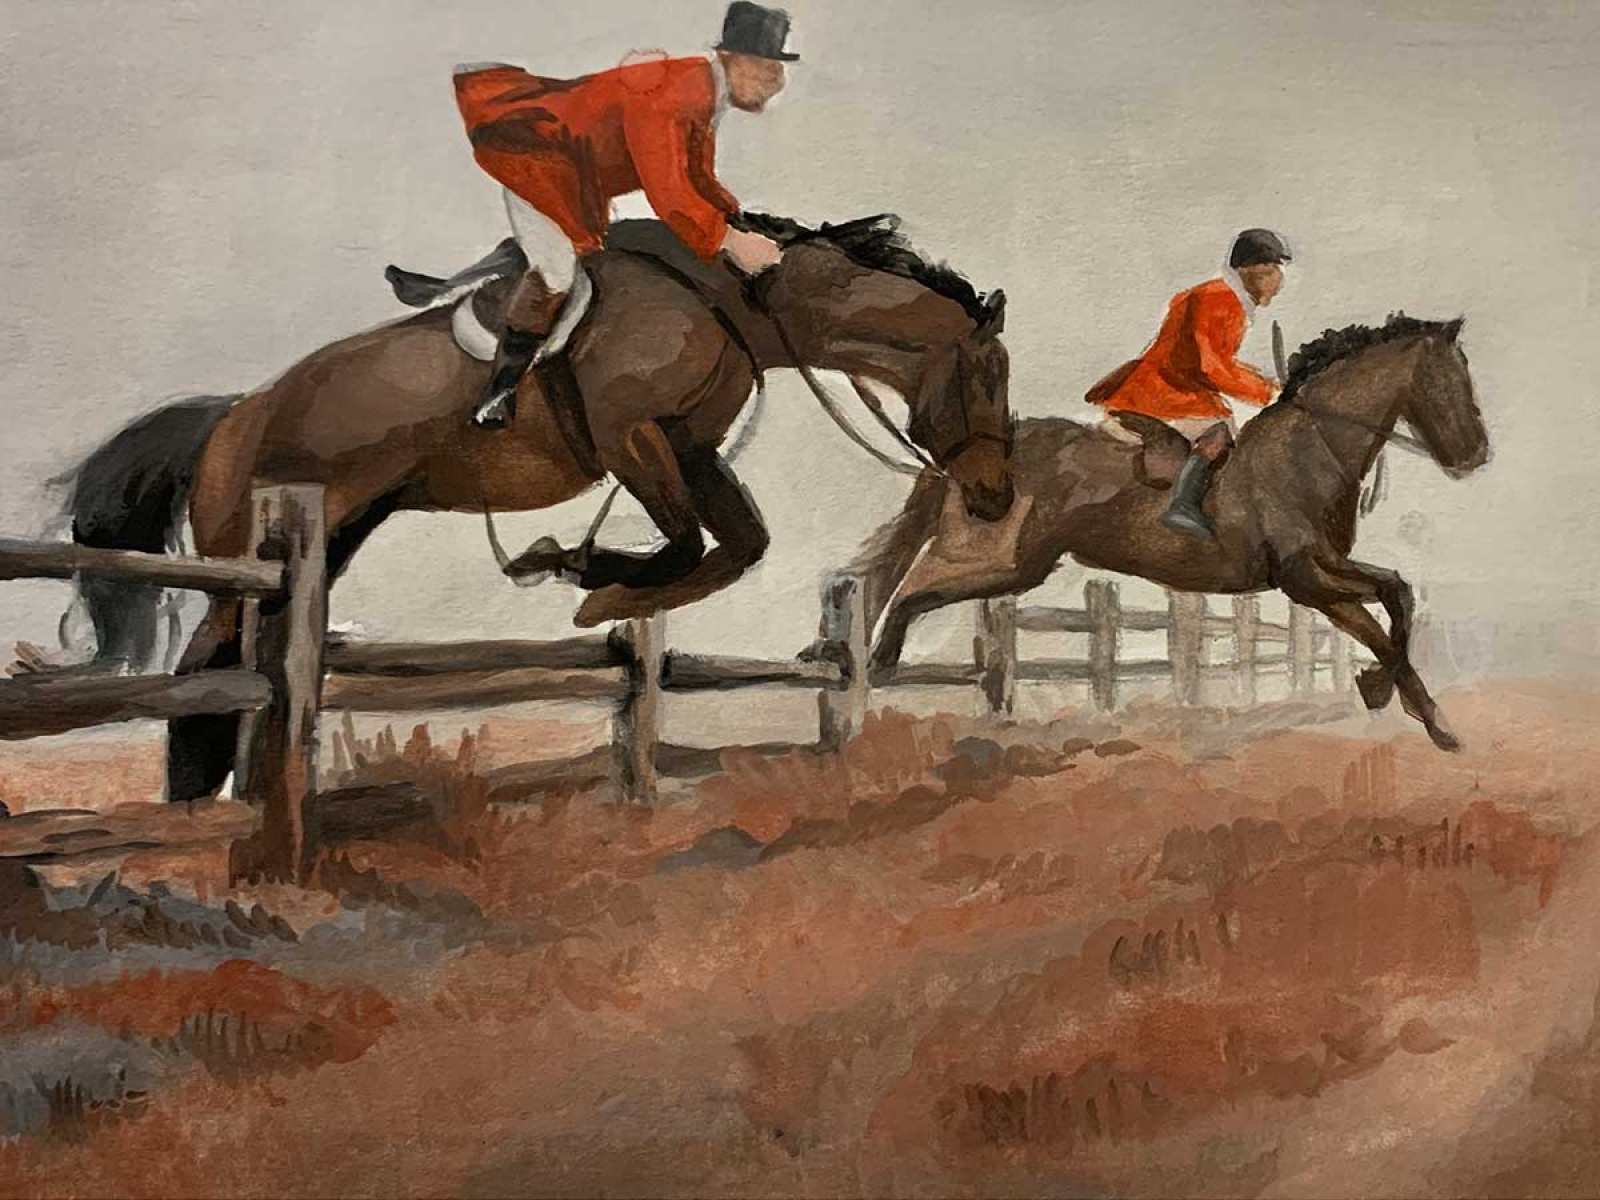 Two men ride horses who are jumping over a fence.